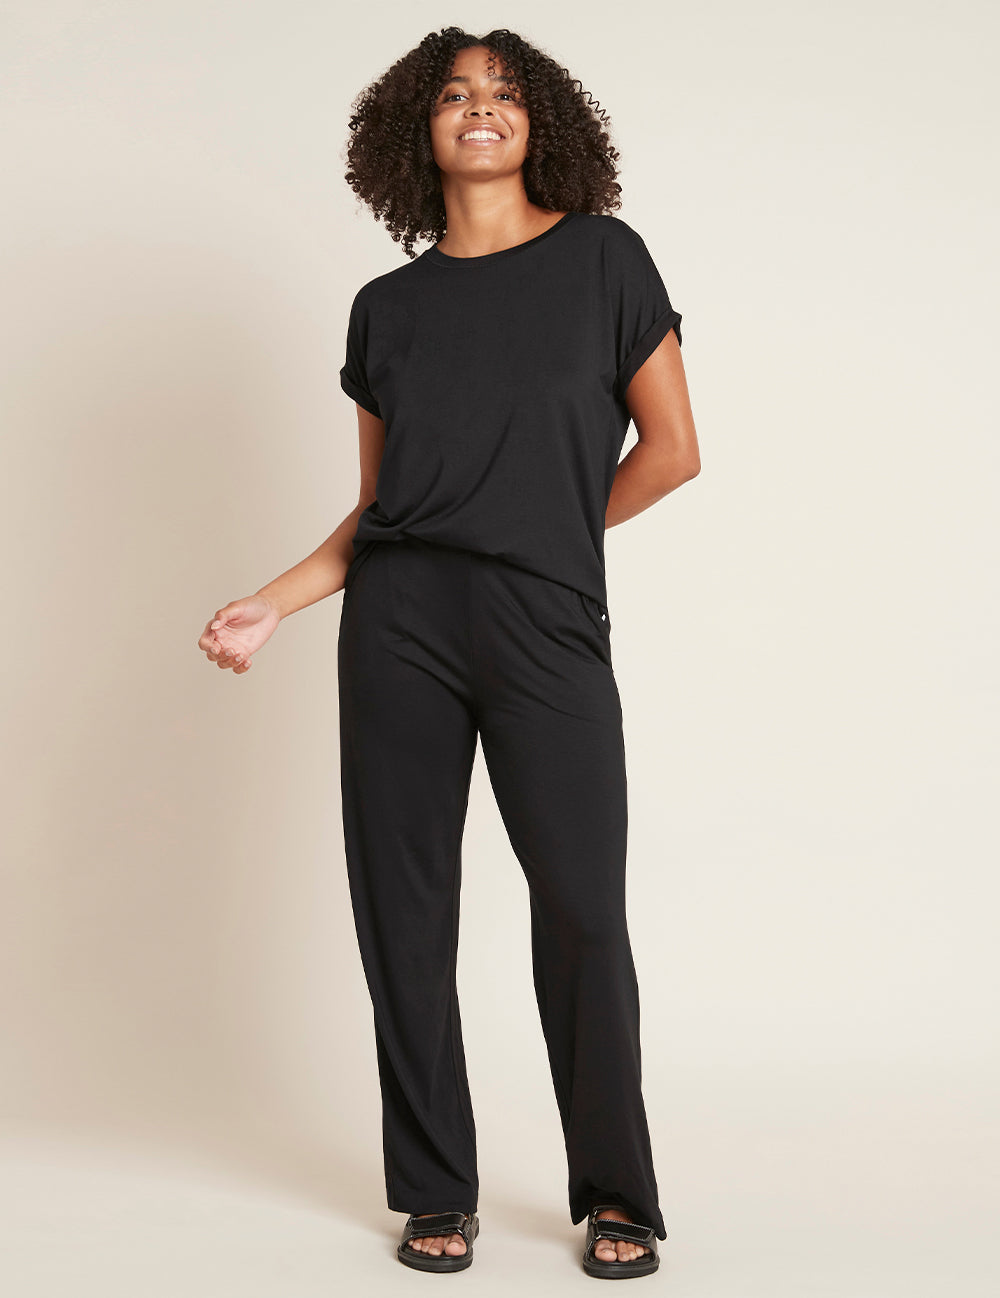 Boody South Africa on Instagram: Make comfort your default setting with  our Downtime Lounge Pants. ☁ . An easy to wear style that is complete with  side pockets, our Downtime Lounge Pants